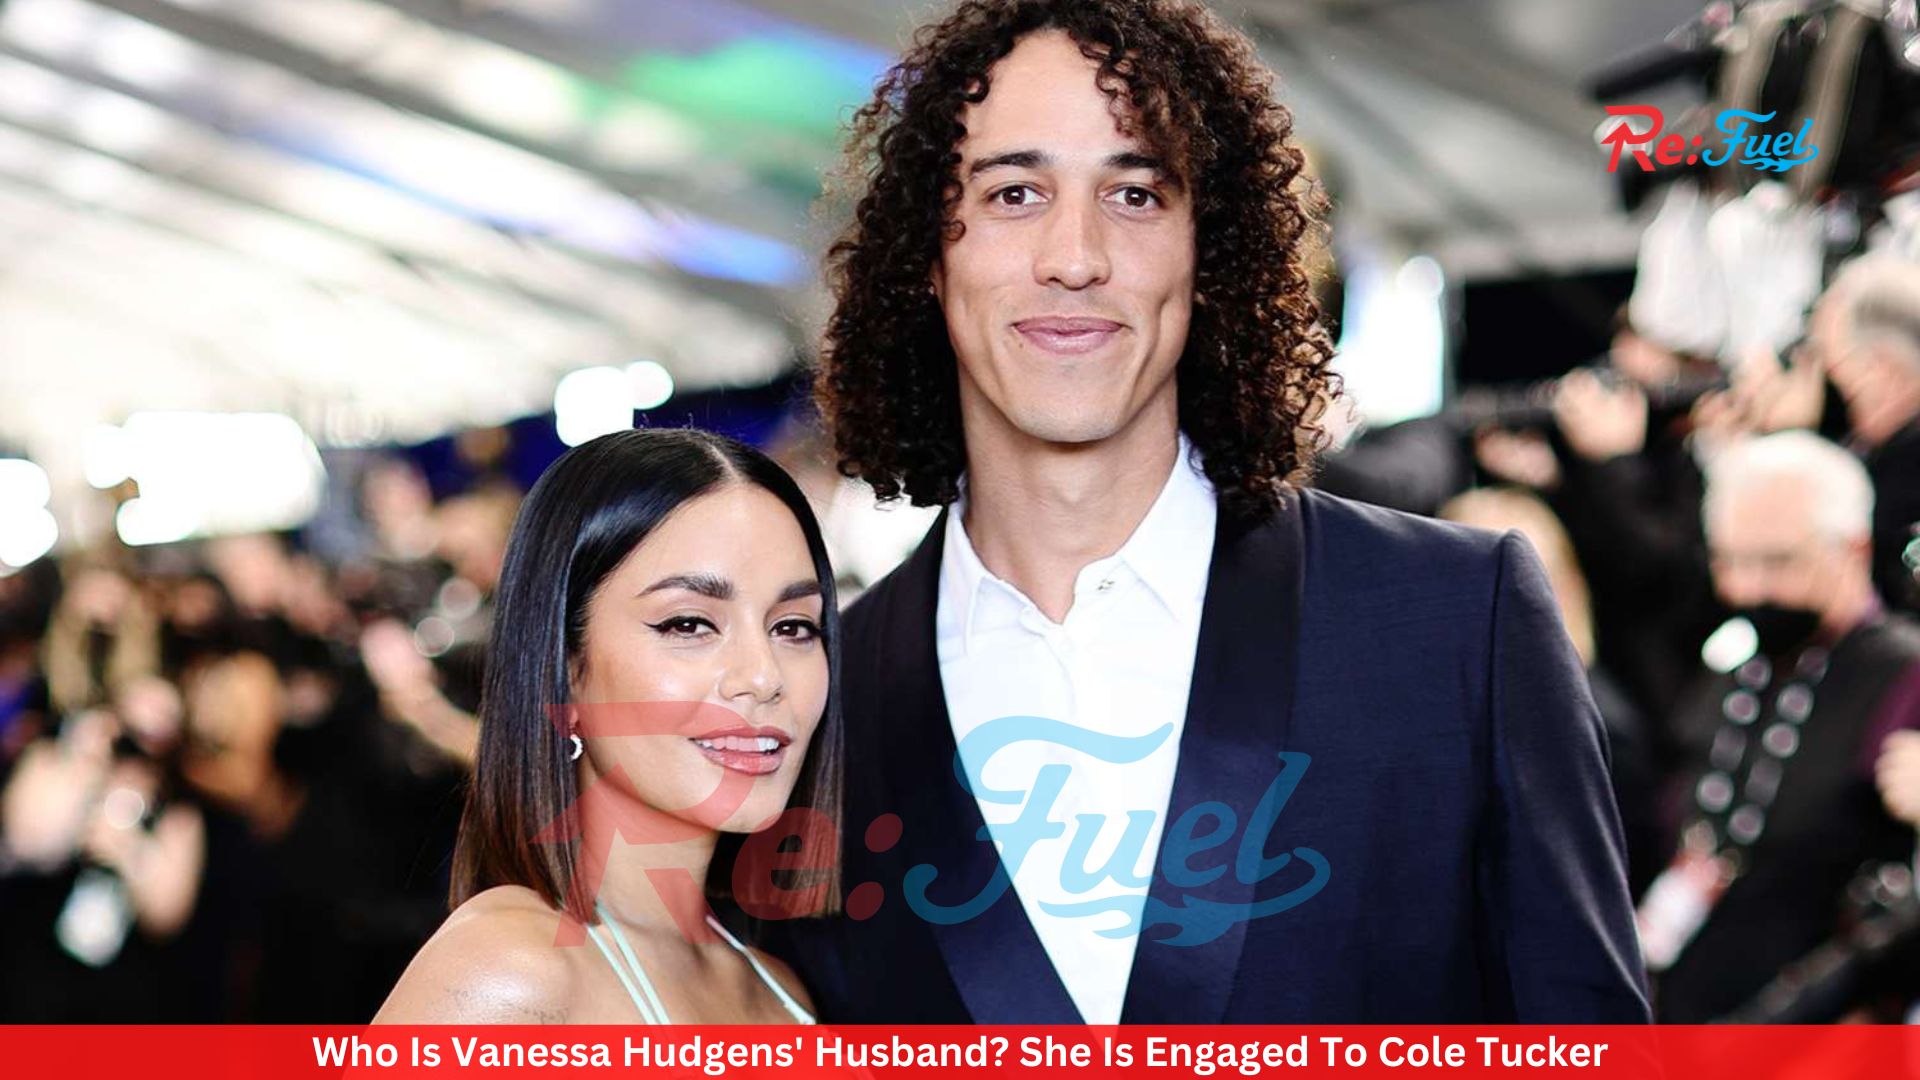 Who Is Vanessa Hudgens' Husband? She Is Engaged To Cole Tucker